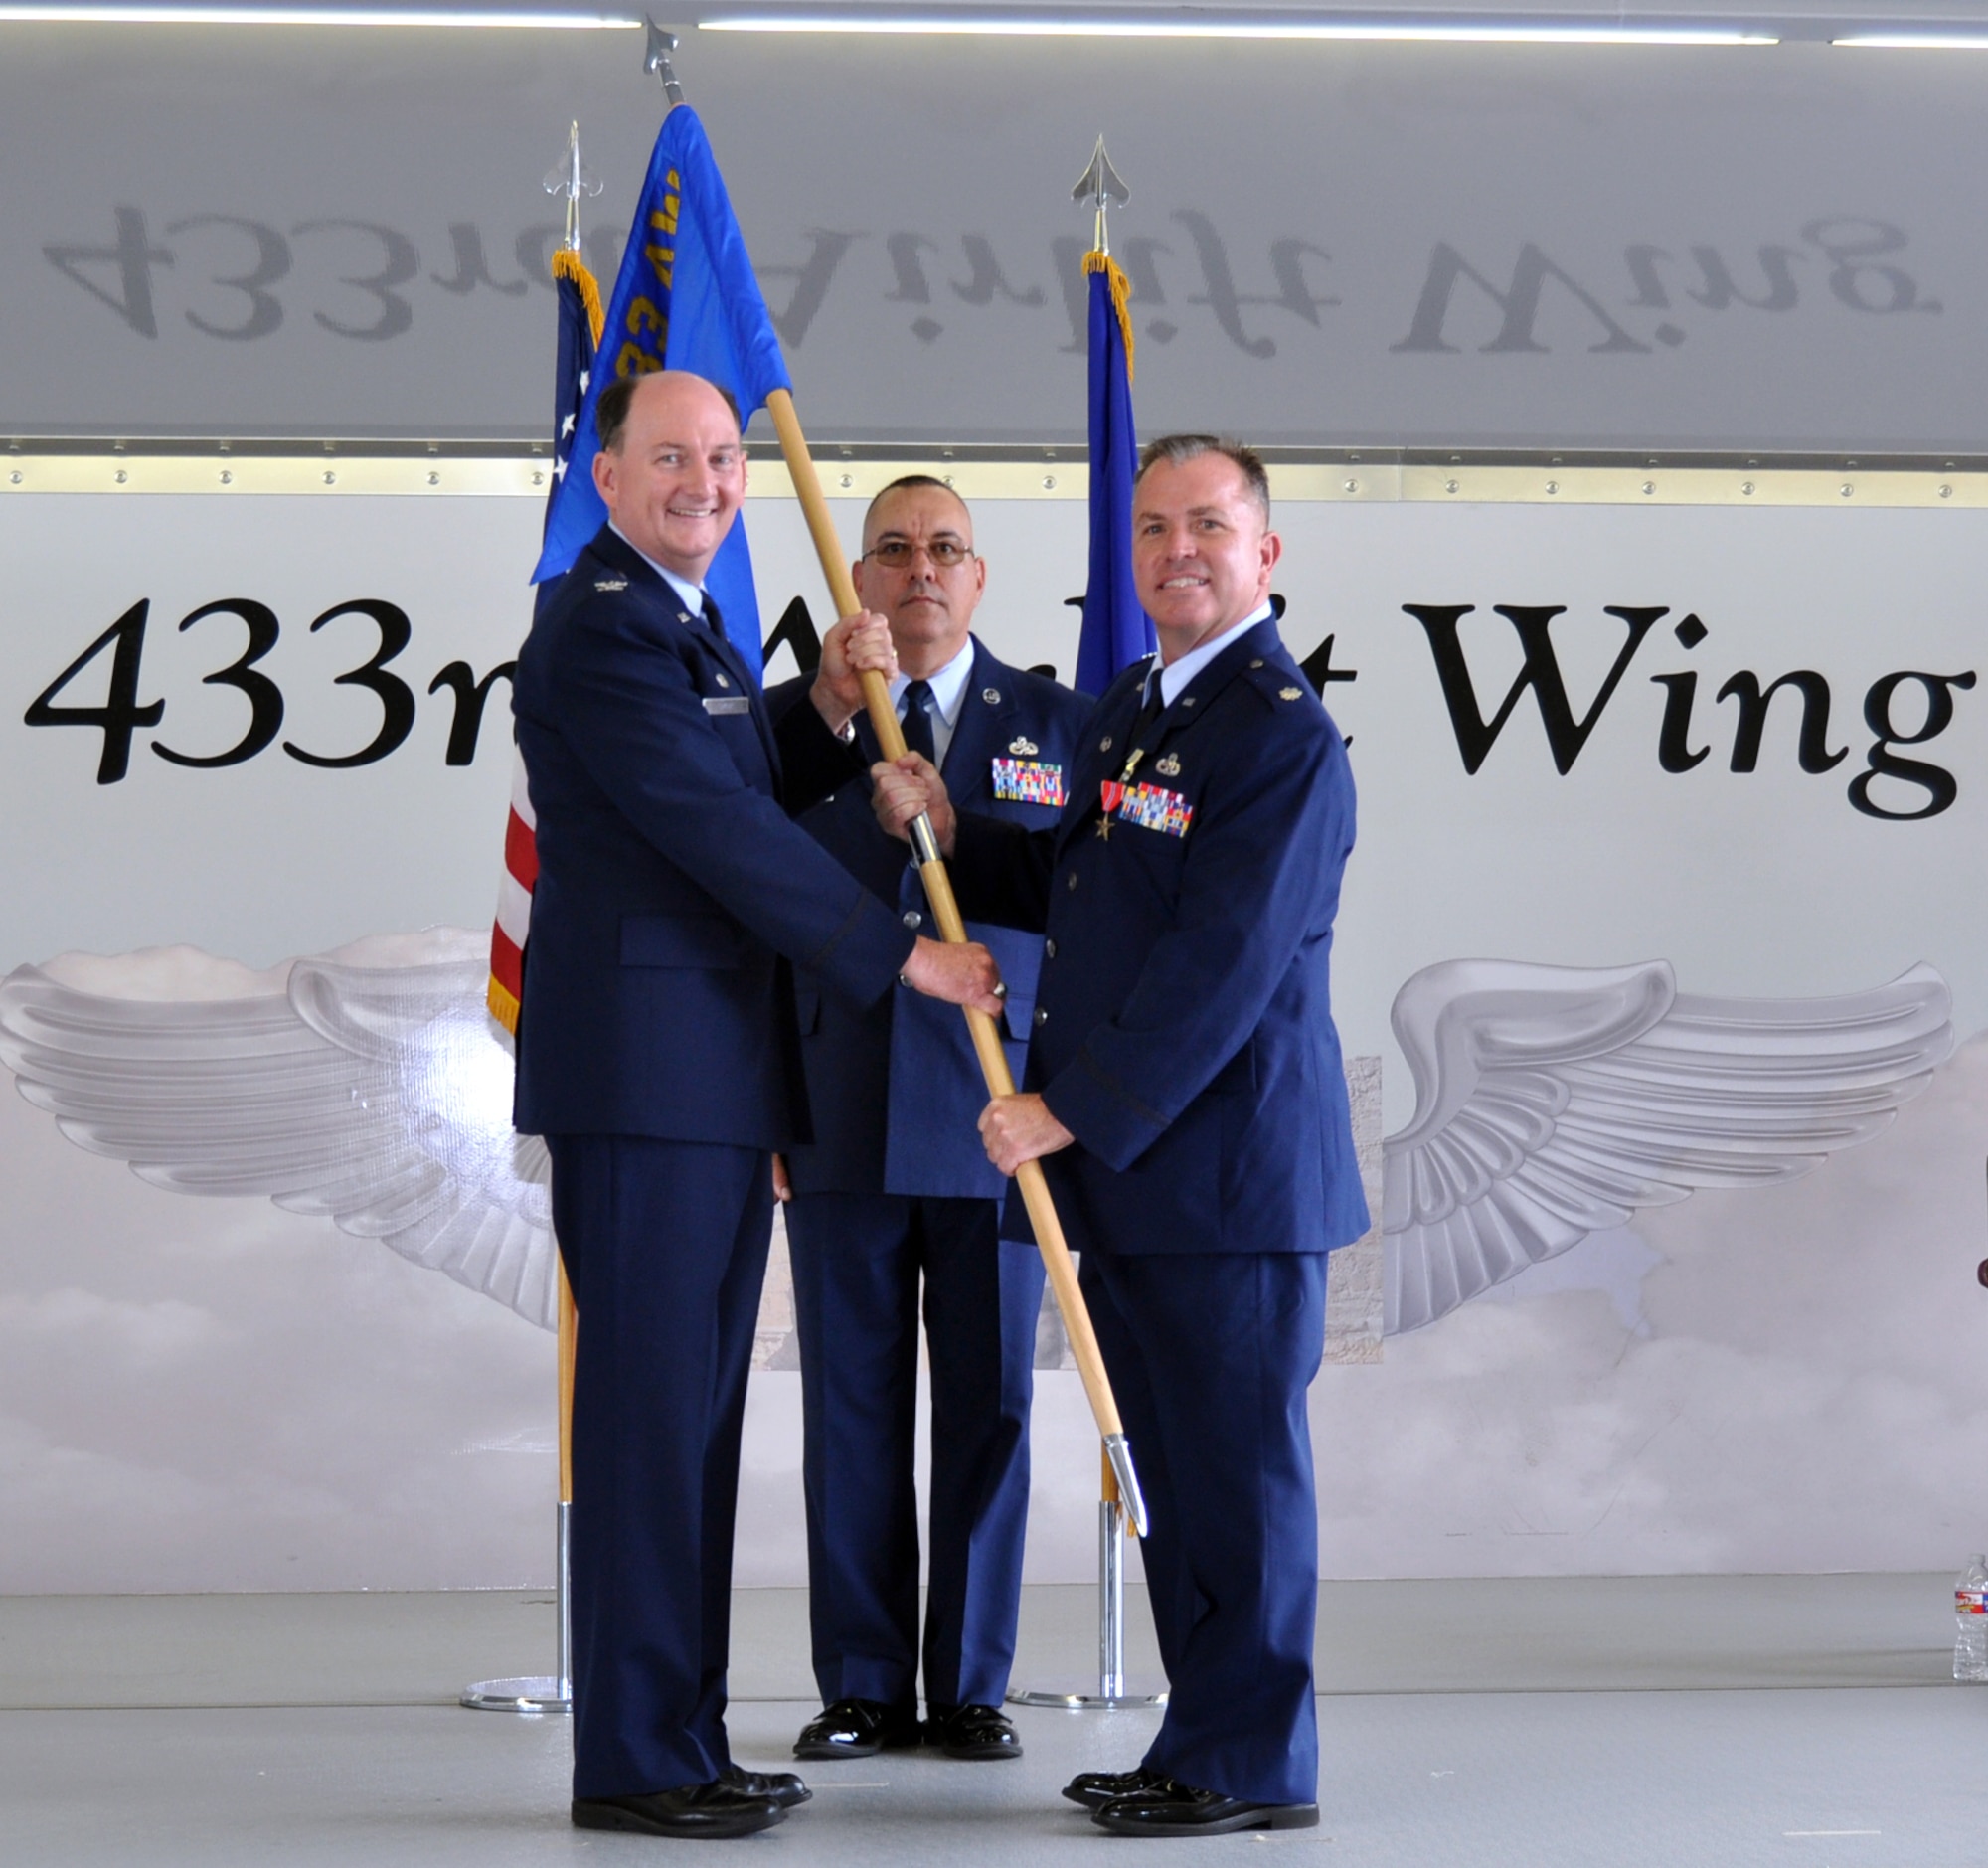 Col. Thomas K. Smith Jr., 433rd Airlift Wing commander passes the guidon to new 433rd Maintenance Group commander Lt. Col. Stuart L. Martin while Chief Master Sgt. Joseph Salomon, 433rd MXG superintendent, stands by Oct. 13, 2018 at Joint Base San Antonio-Lackland, Texas.